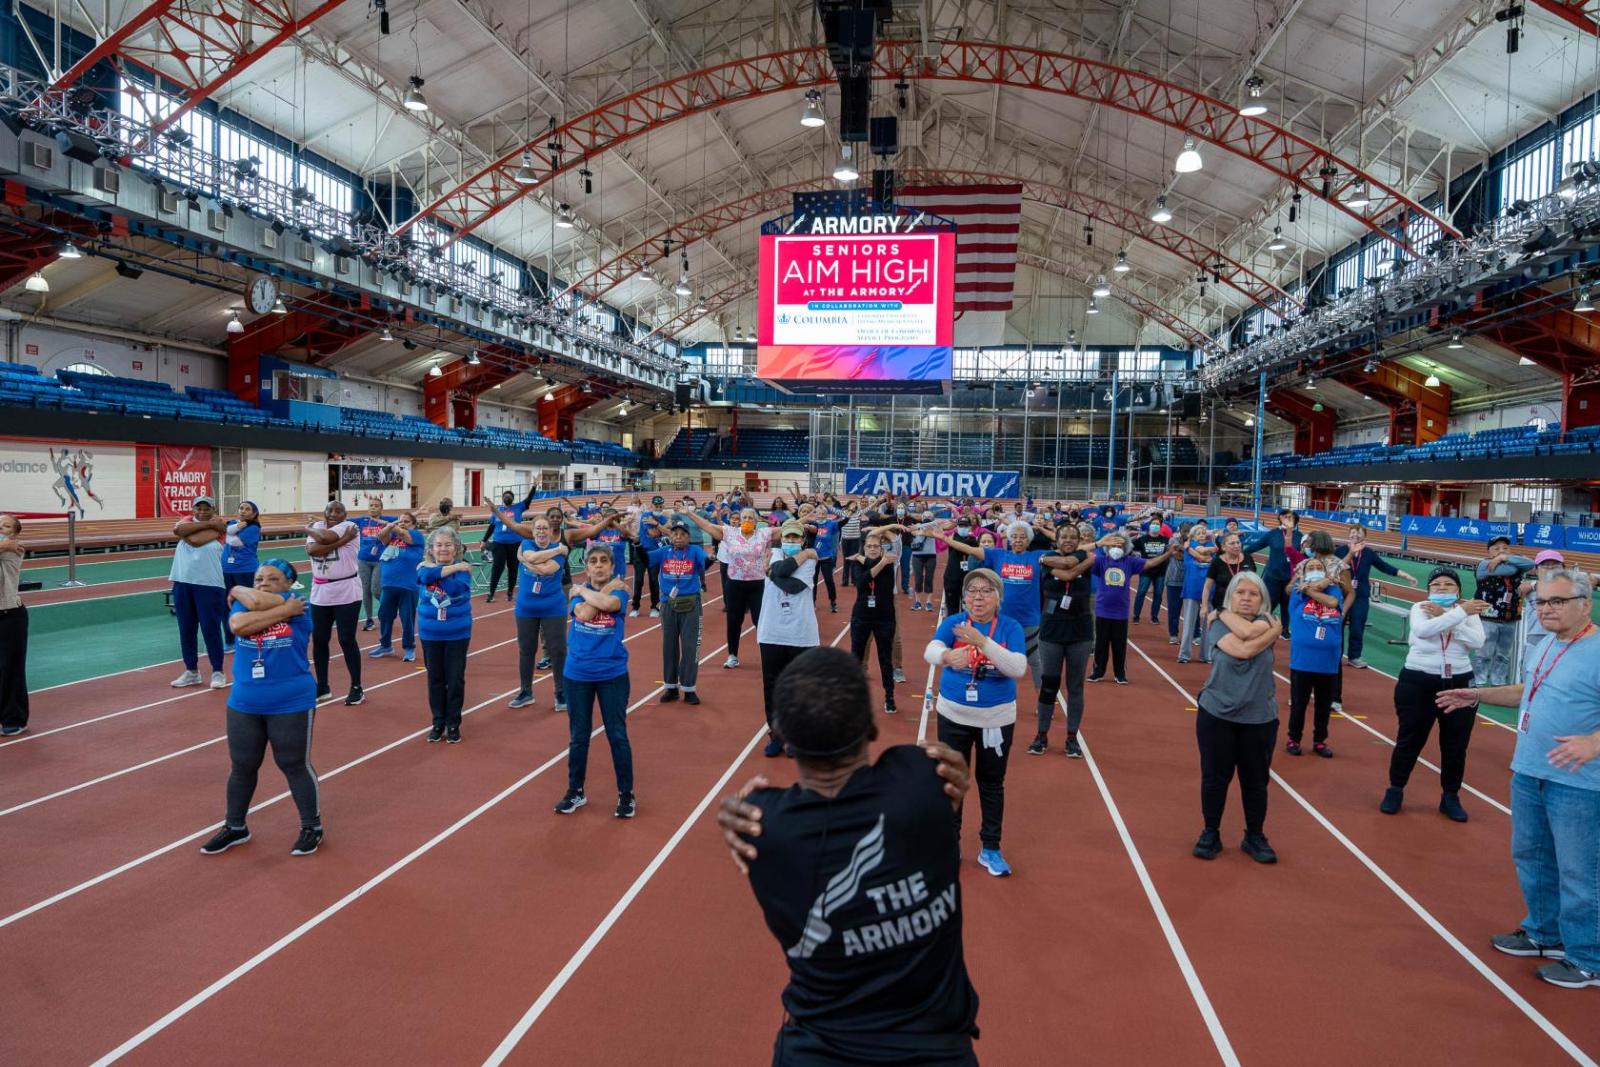 Fitness coach guides participants through group stretches after their workout